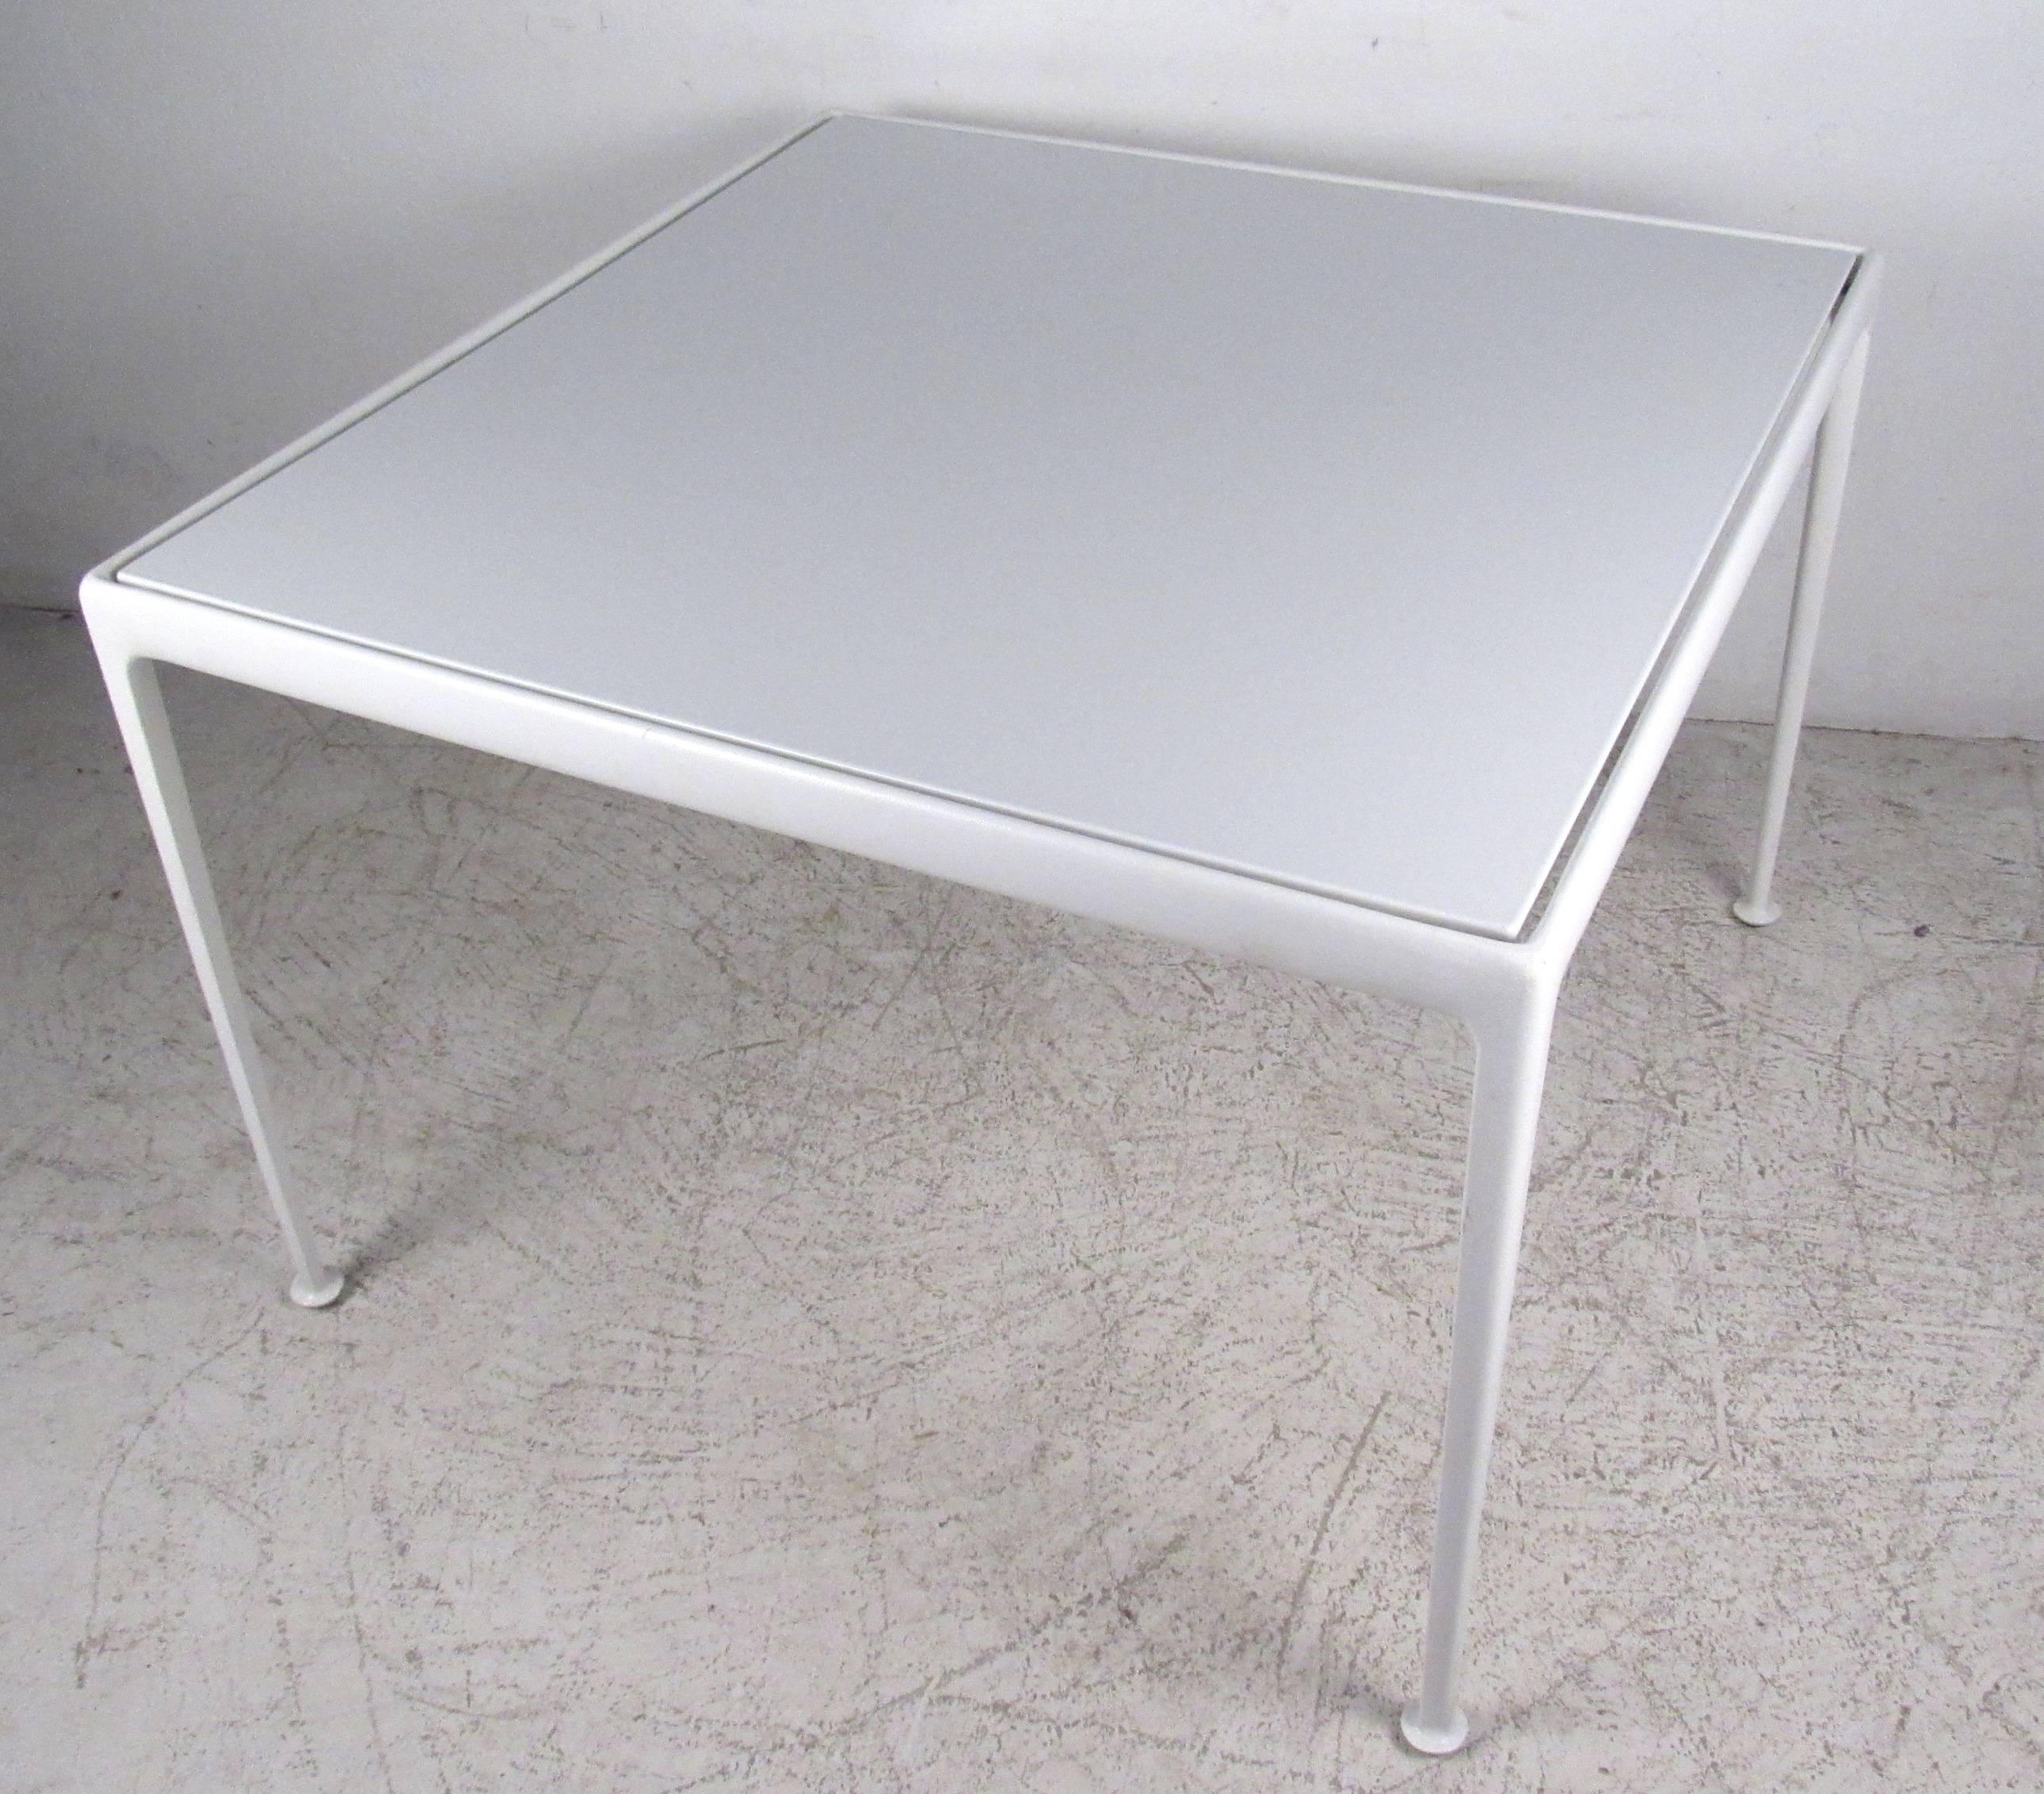 Welded cast and extruded aluminum table designed by Richard Schultz for Florence Knoll in 1966. Please confirm item location (NY or NJ) with dealer.